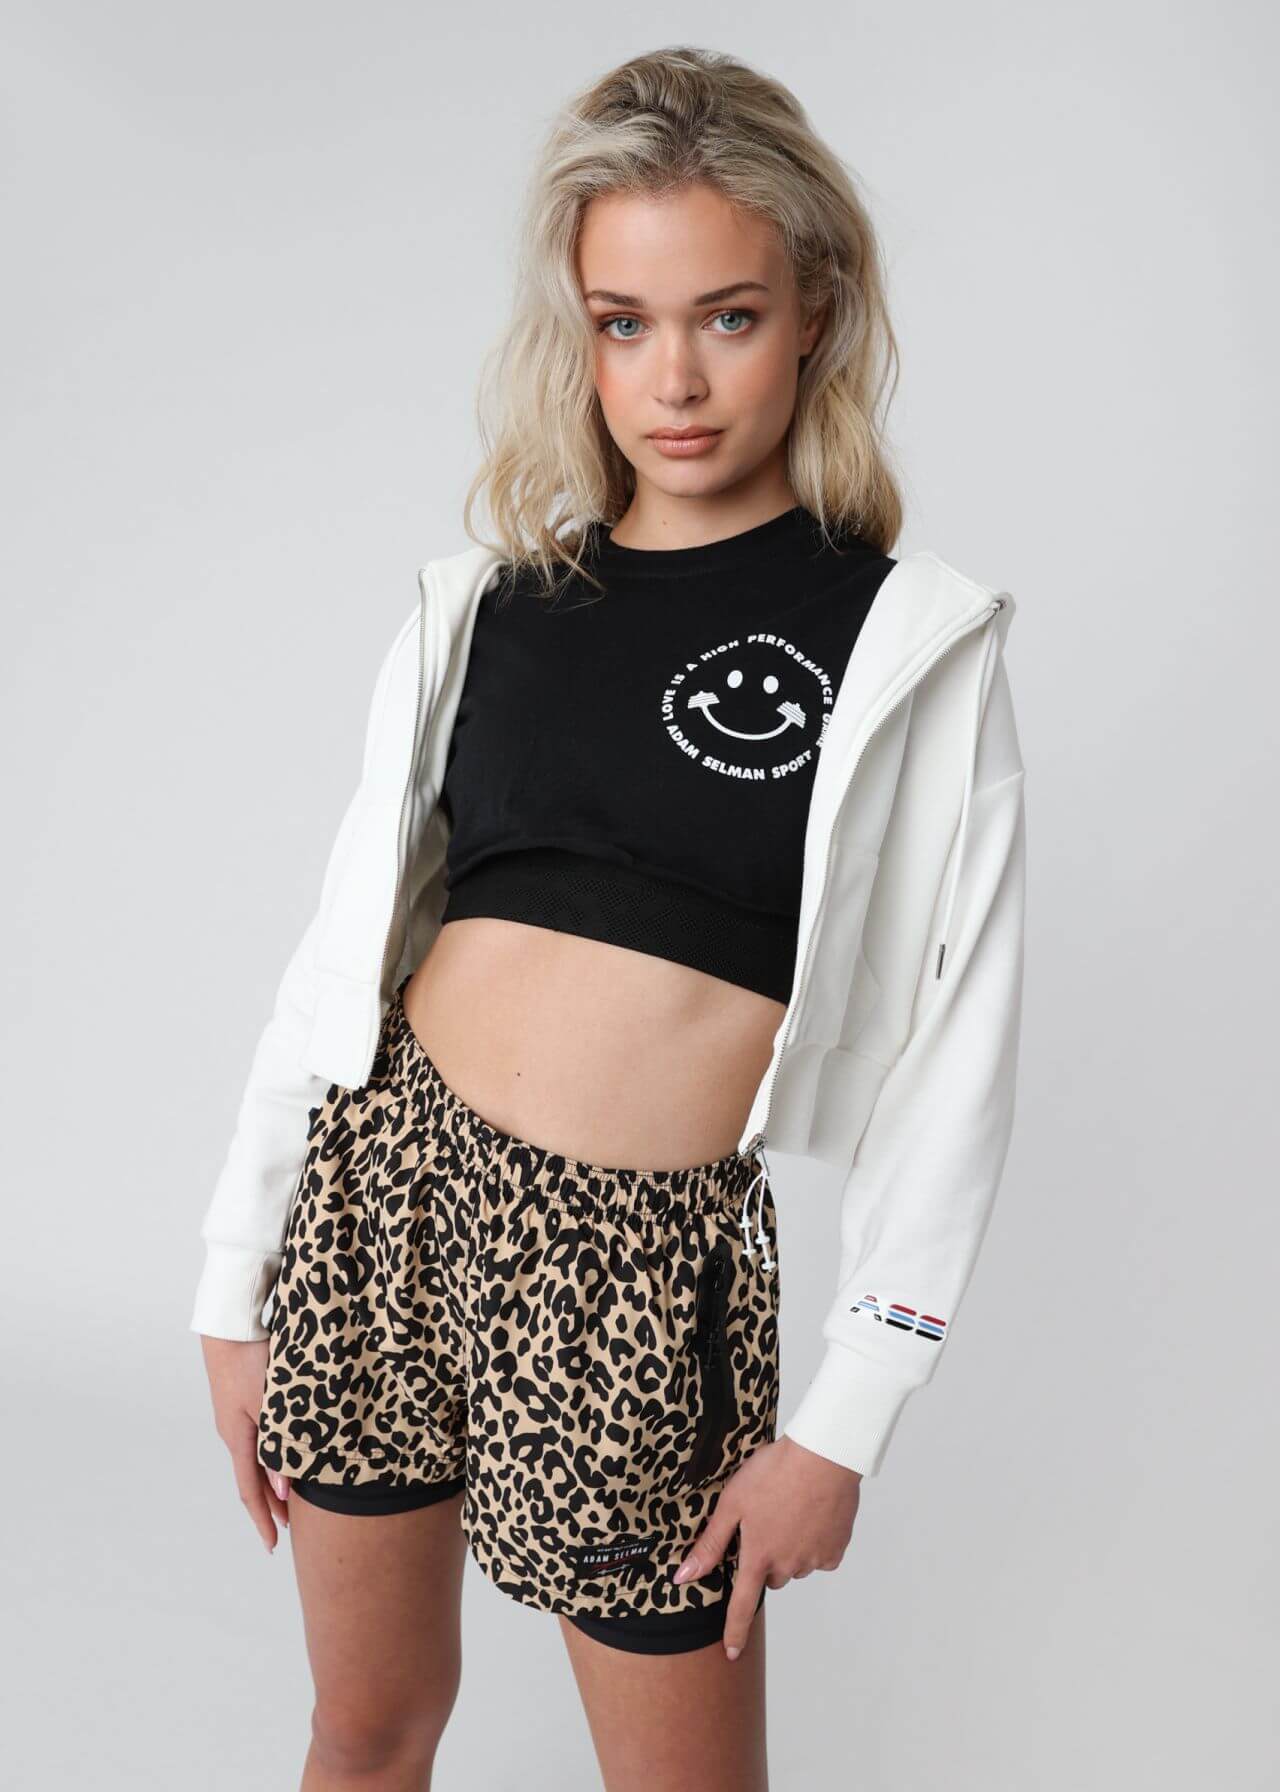 Carolina V. Marie Cool Looks In White Jacket With Black Crop Top & Tiger Print Shorts Pants